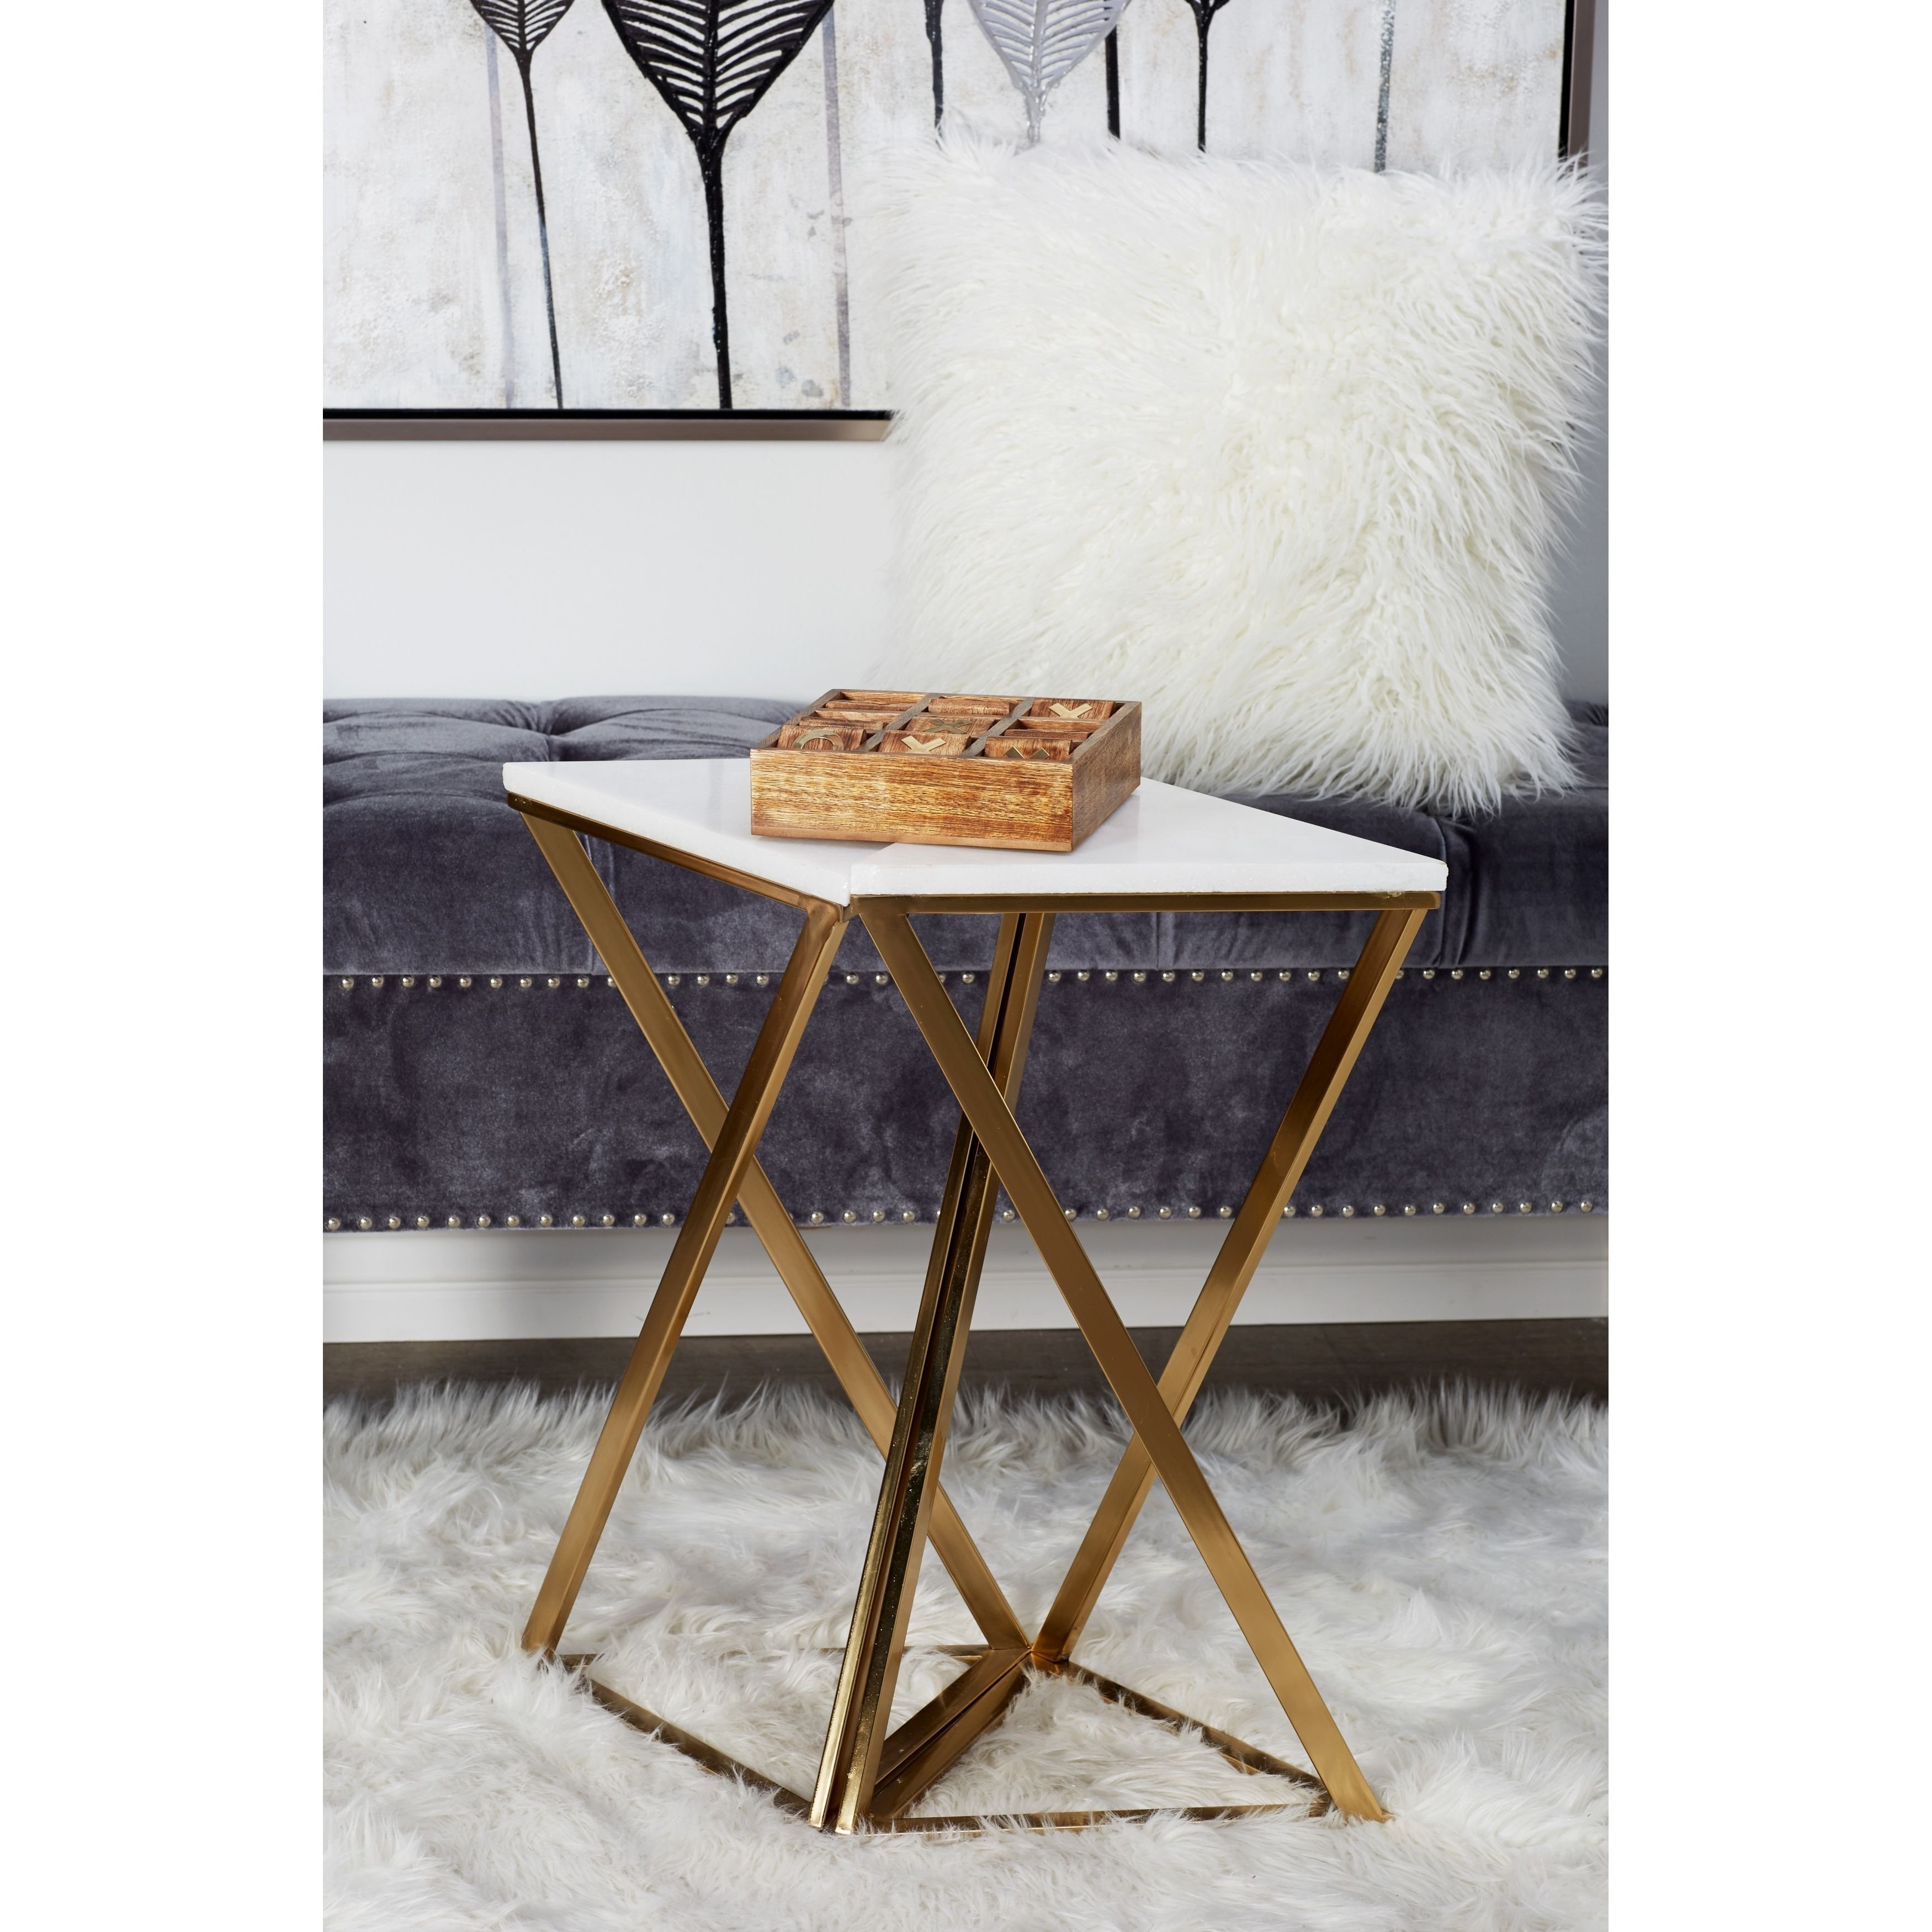 marble accent table limetennis set iron and hourglass tables signy drum with top free shipping today purple tiffany lamp glass patio homemade outdoor coffee ikea storage units